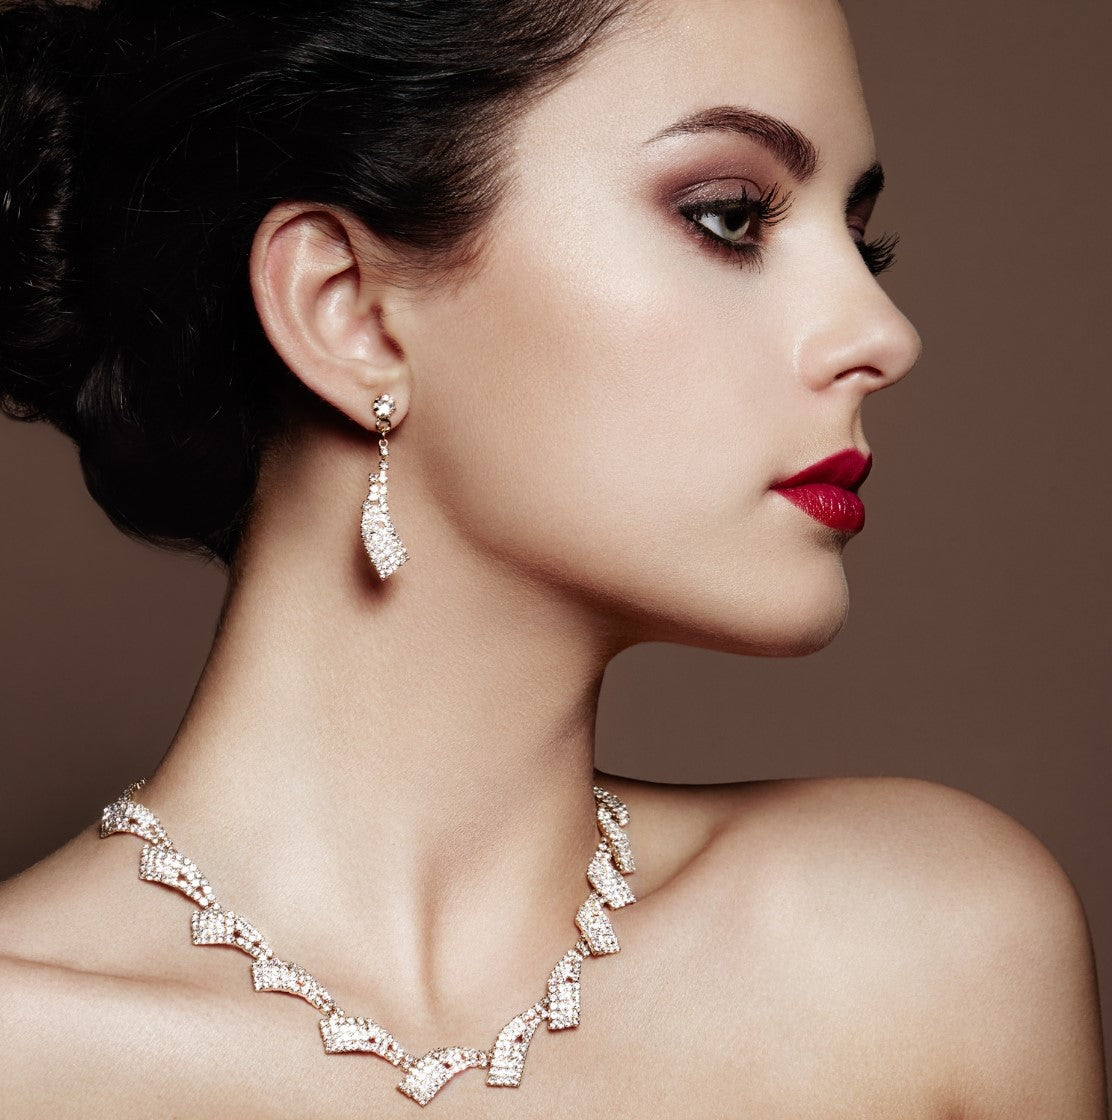 Jewelry for Formal Event